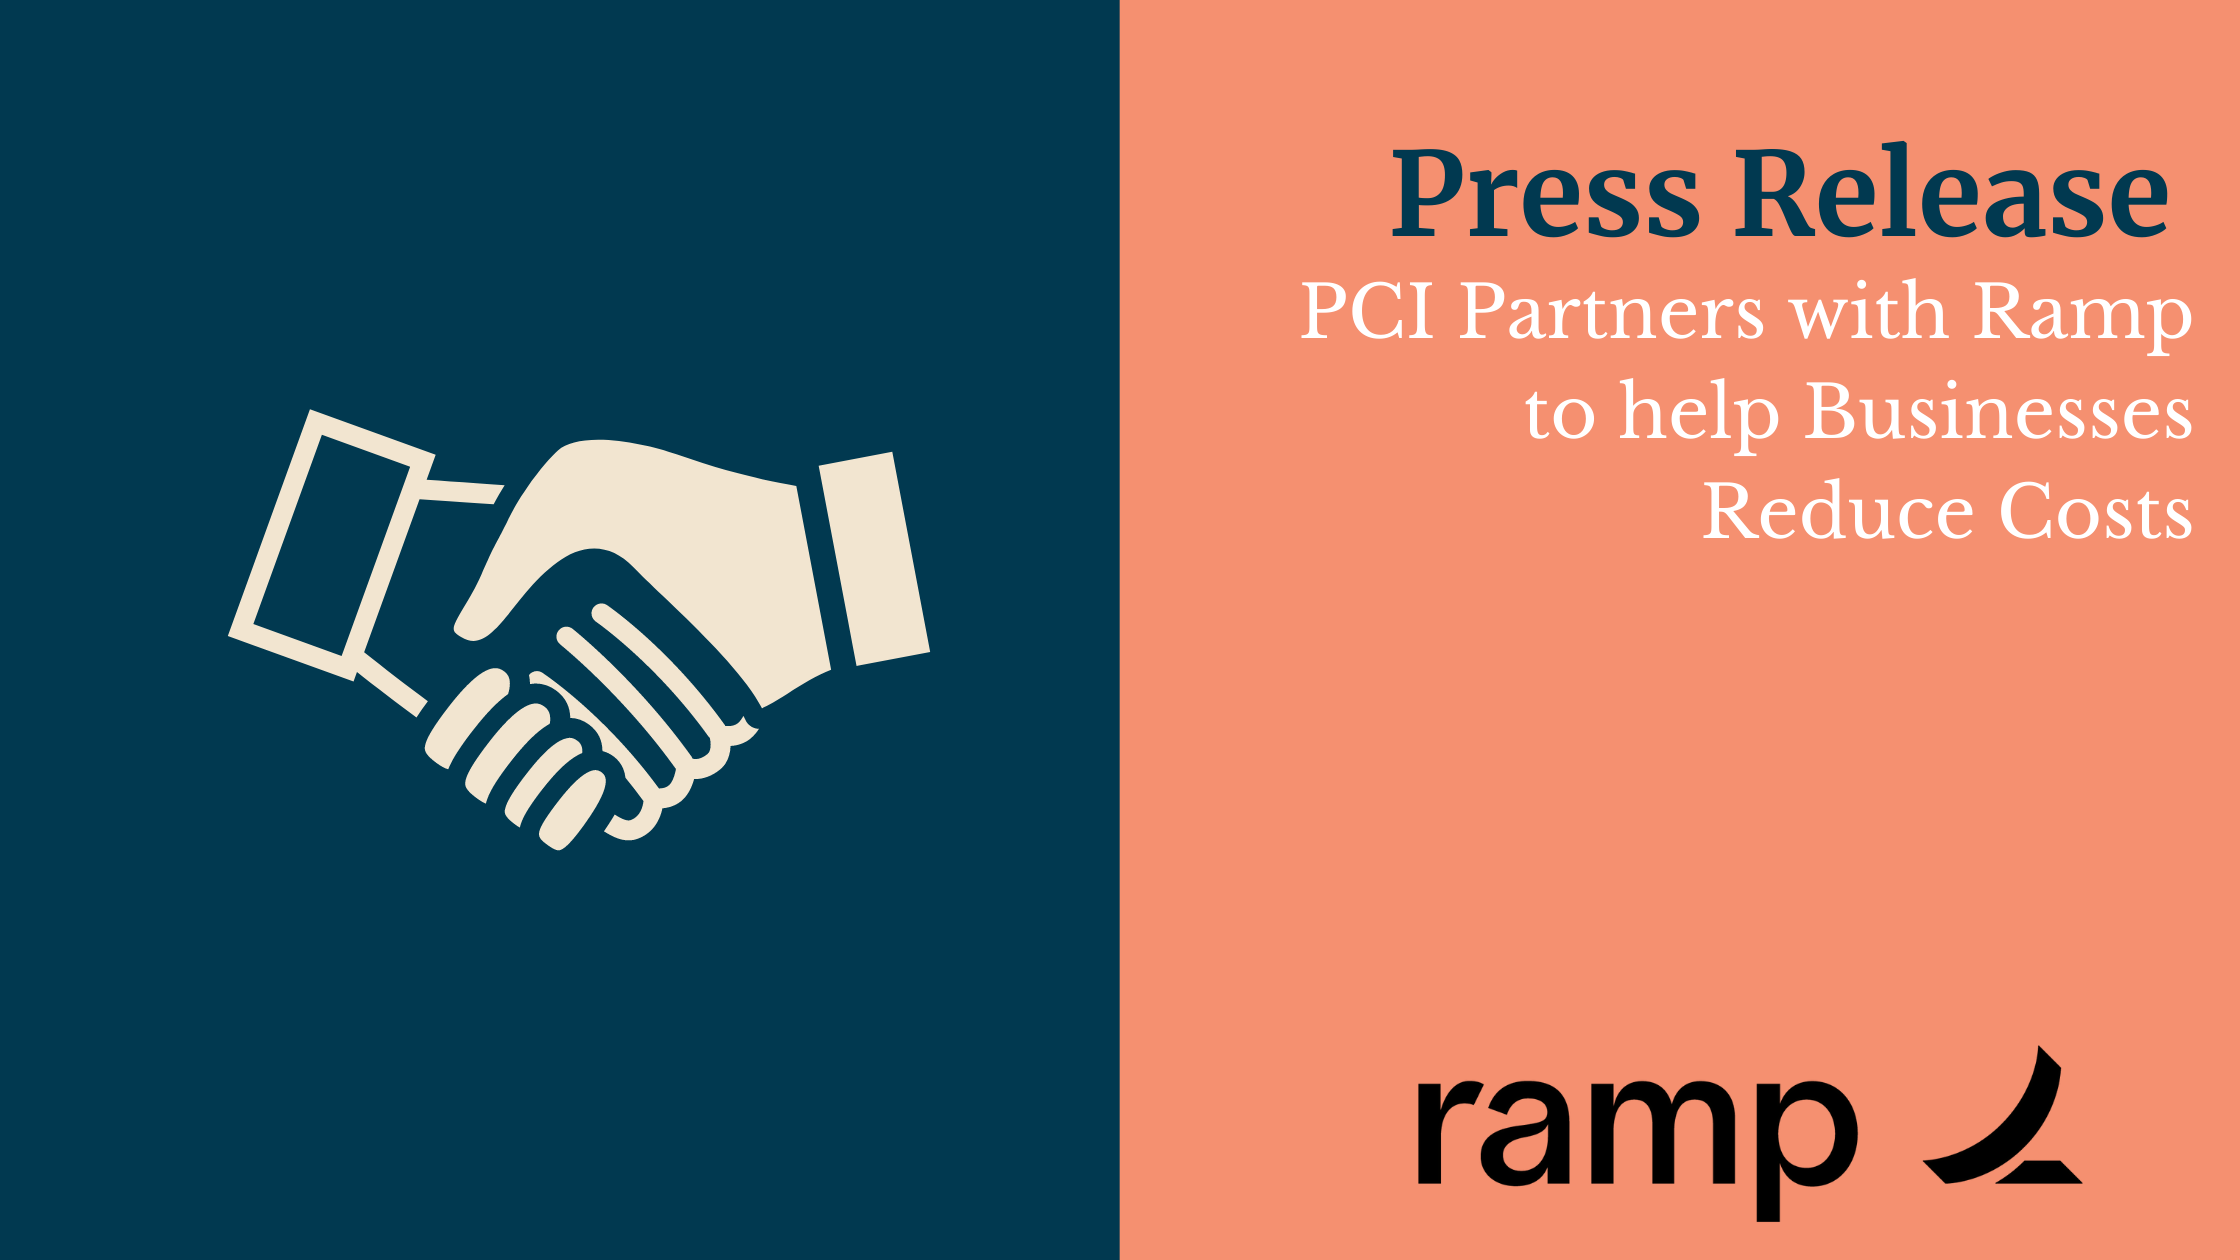 Premier Consulting & Integration (PCI) Partners with Ramp to help Businesses Reduce Costs